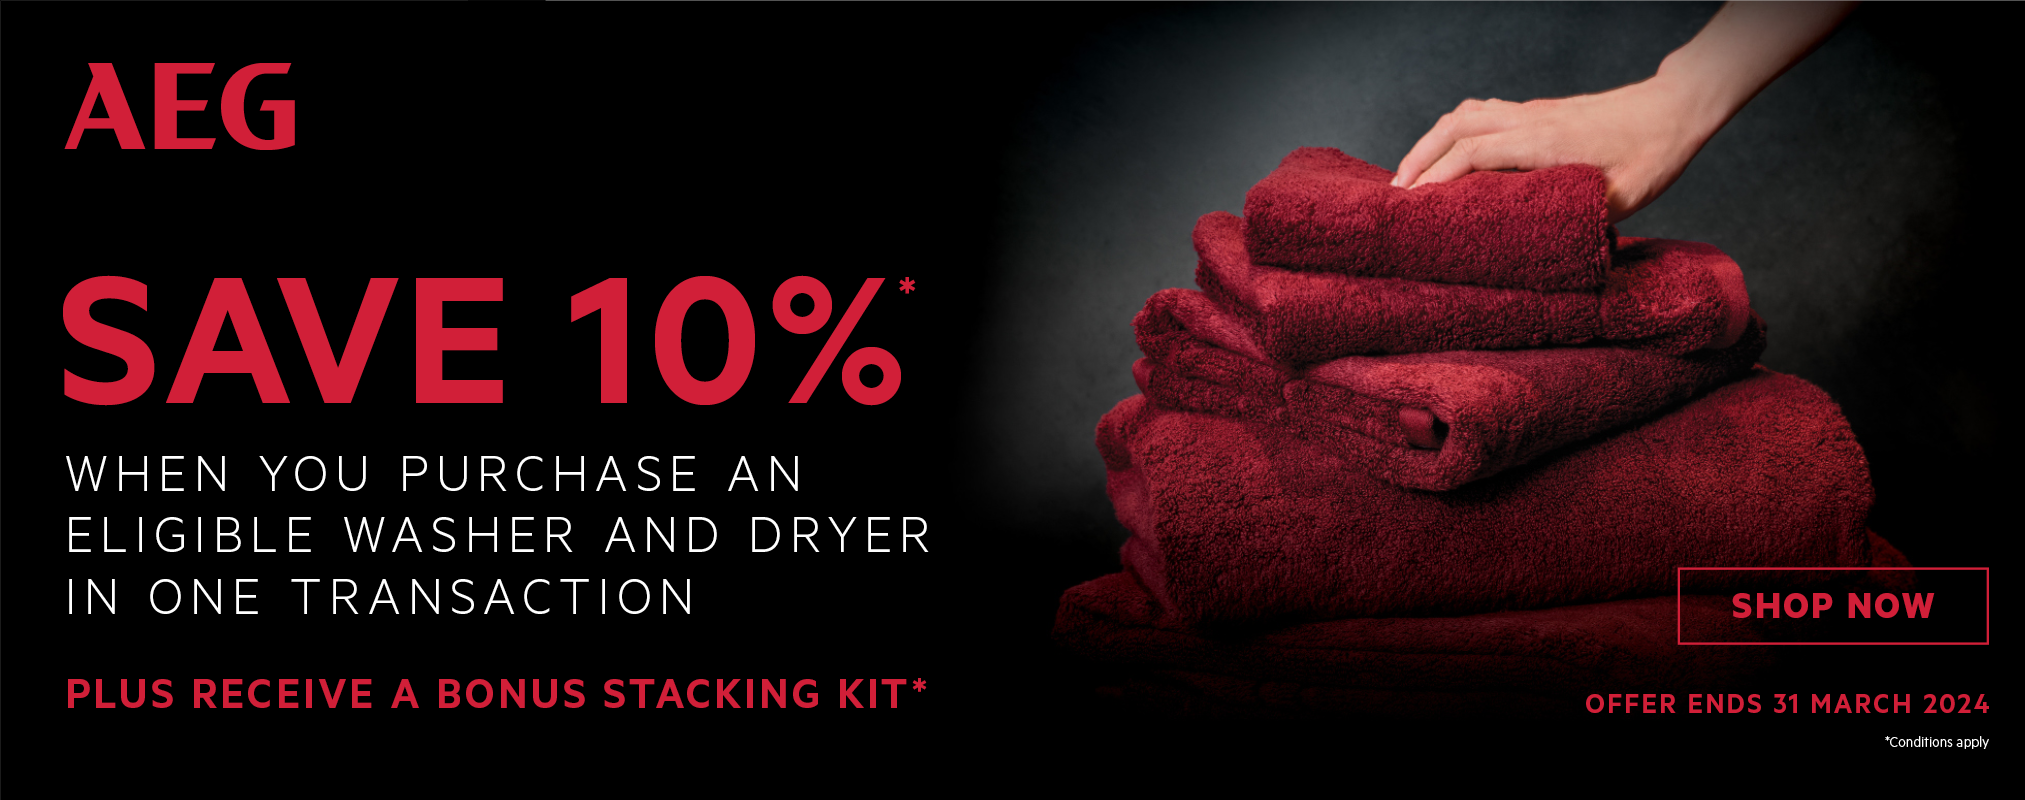 Save 10%* When You Purchase An Eligible AEG Washer & Dryer In One Transaction